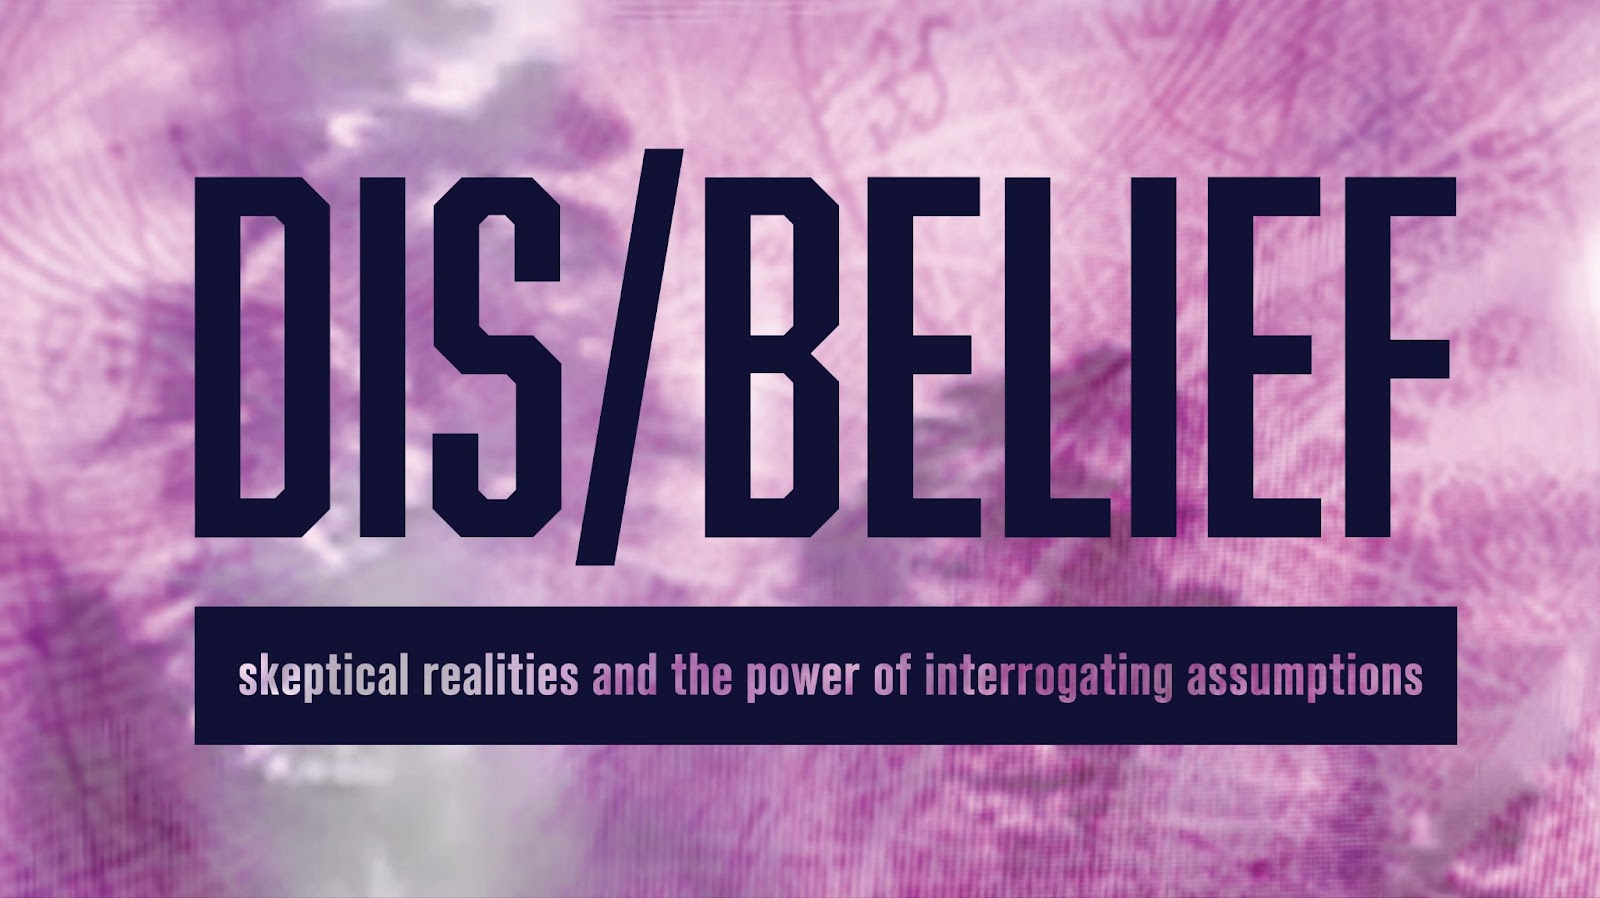 Dis/Belief - skeptical realities and the power of interrogating assumptions